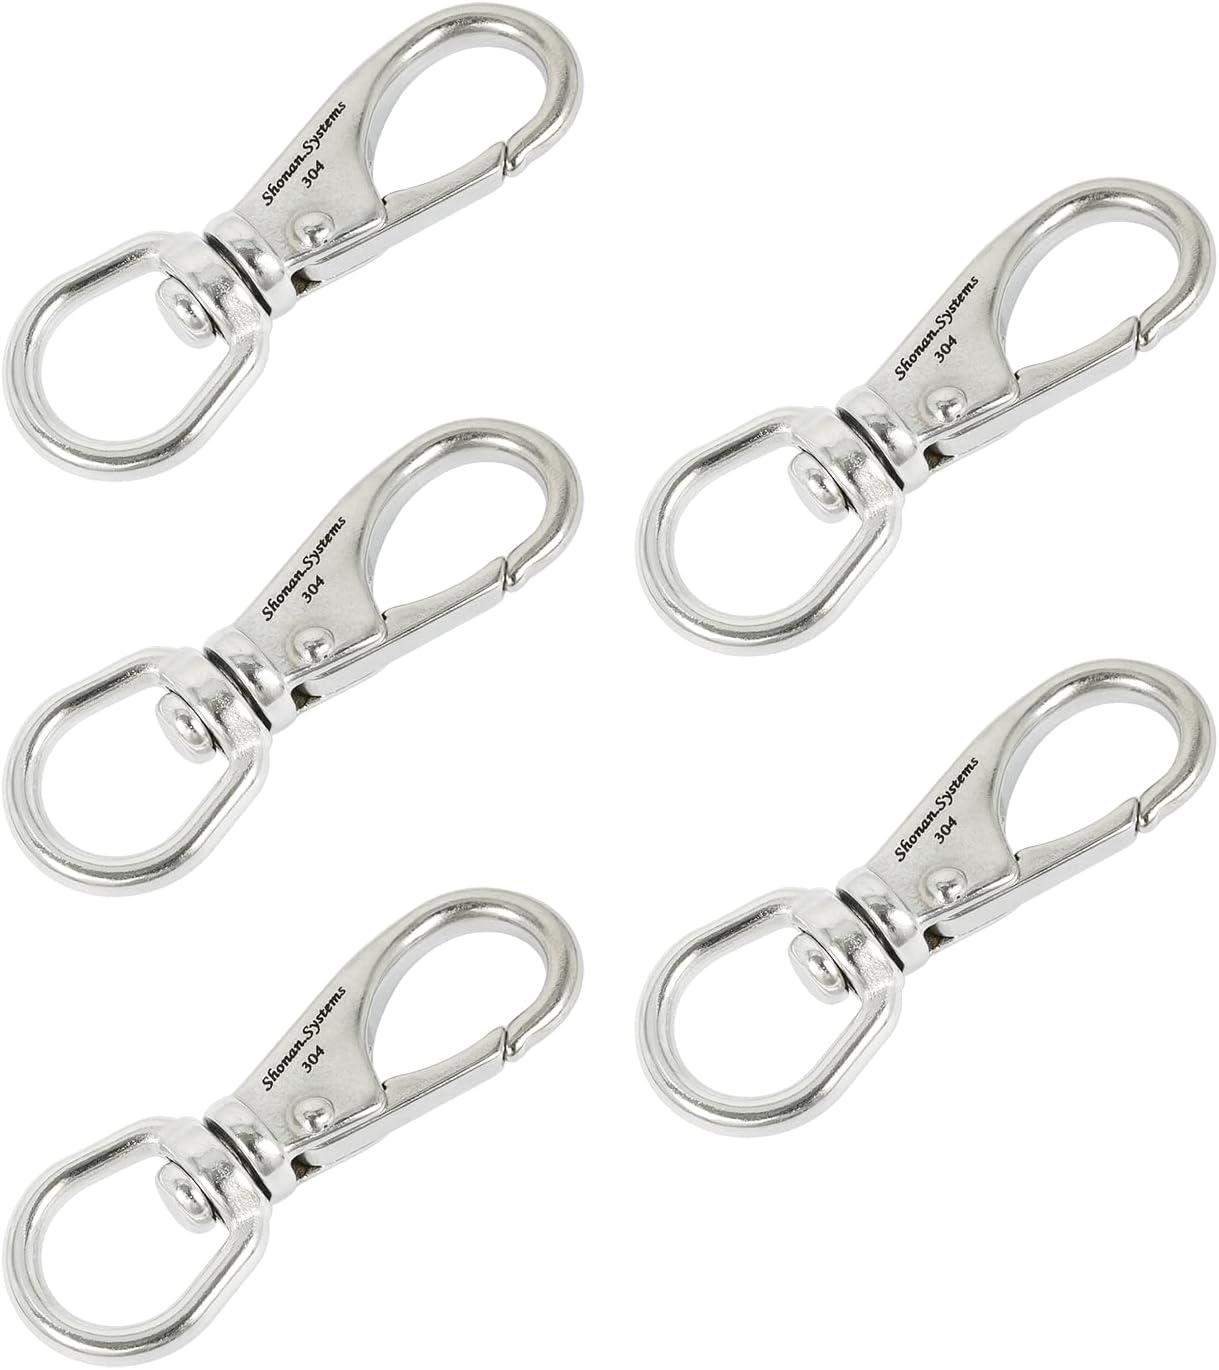 5PCS Rigging Hardware 65mm 304 Stainless Steel Swivel Snap Hook Quick Link  Clips For Dog Leash Keychain Pet Chain Bag